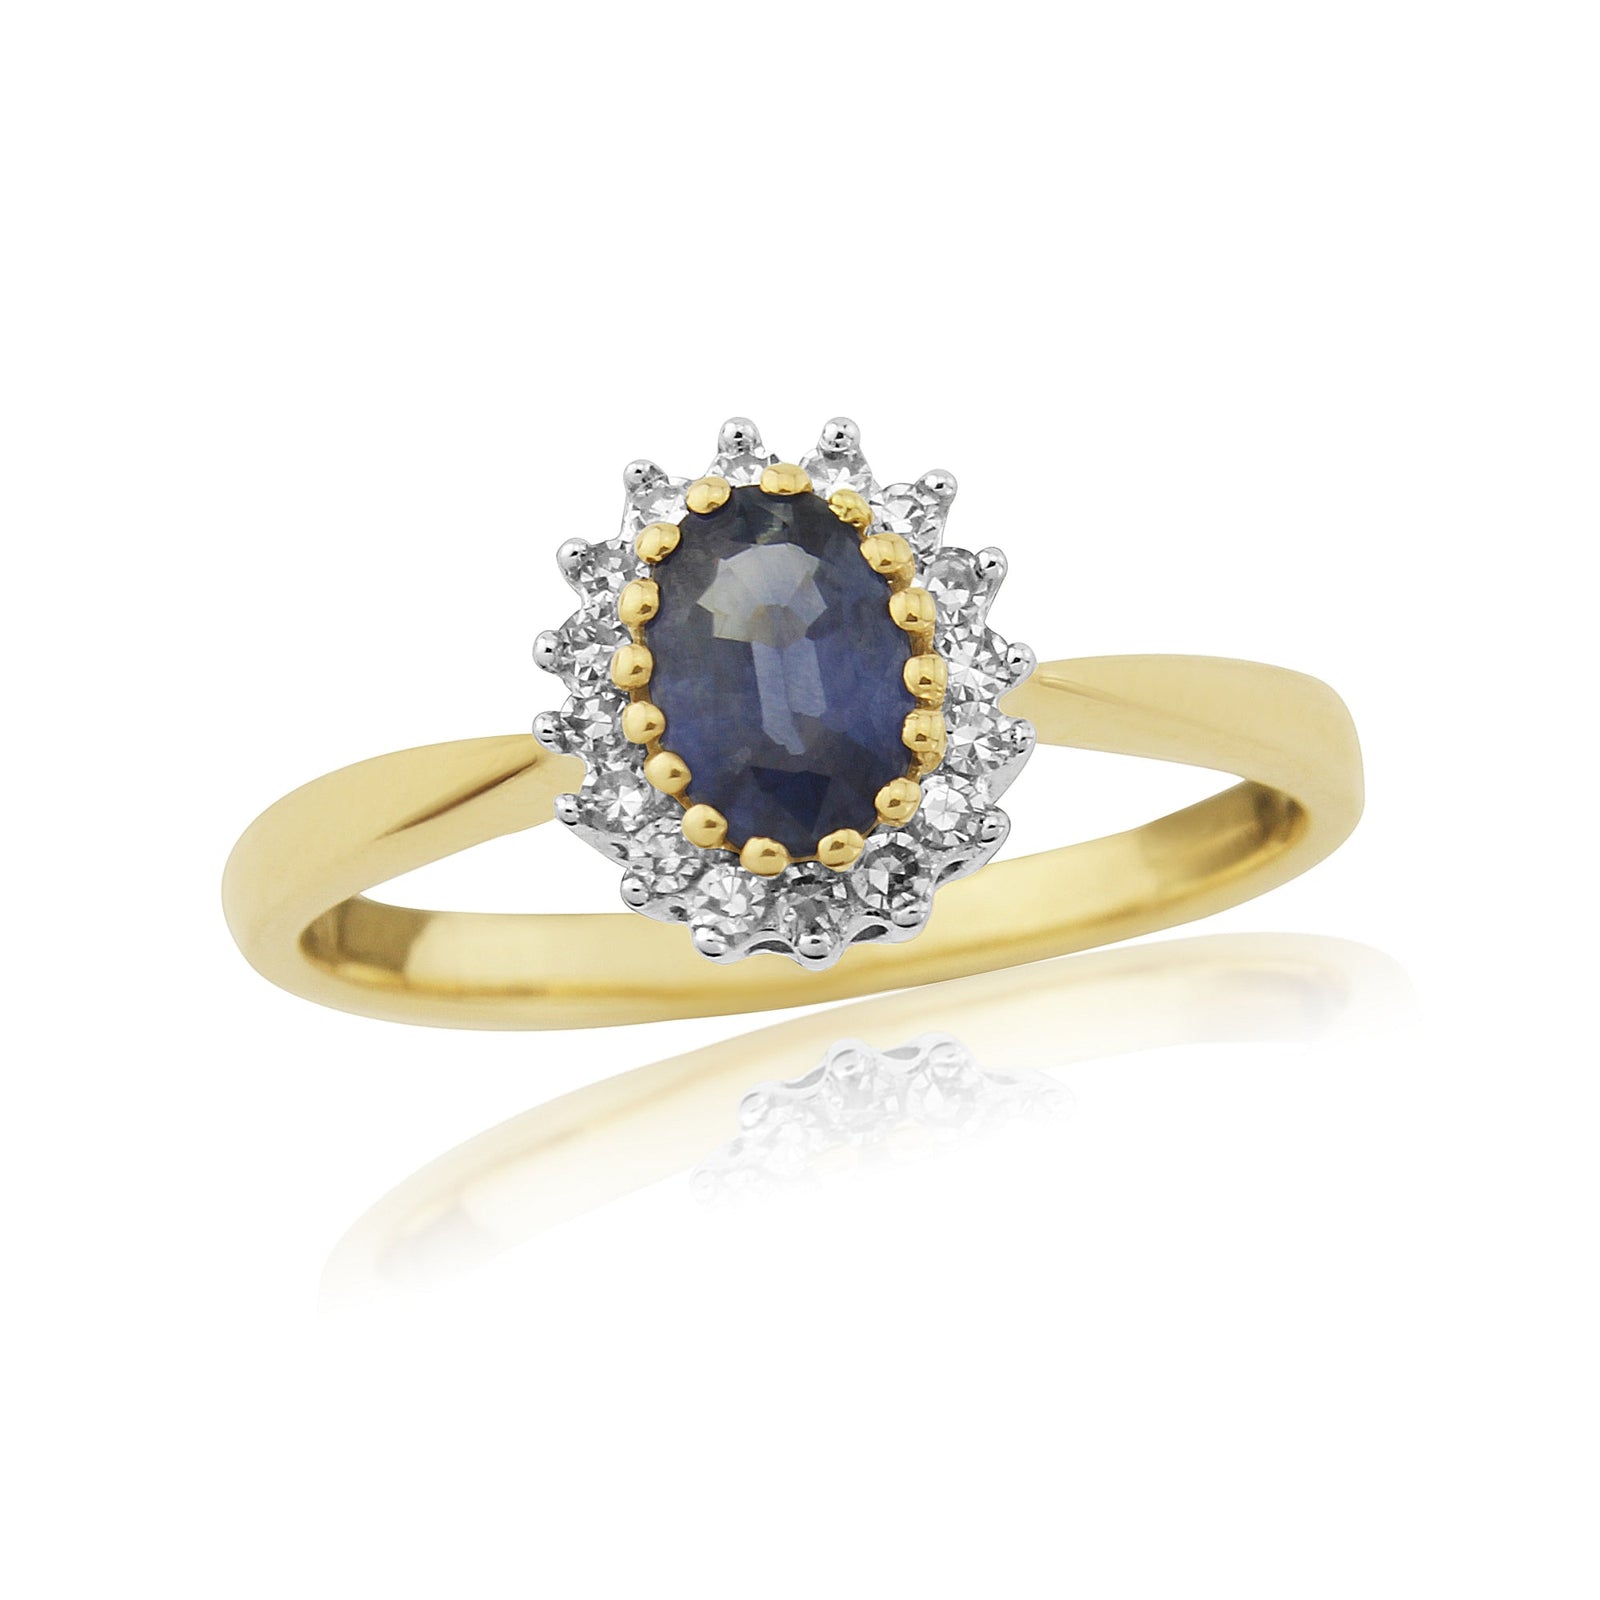 9ct gold 6x4mm oval sapphire & diamond cluster ring 0.12ct